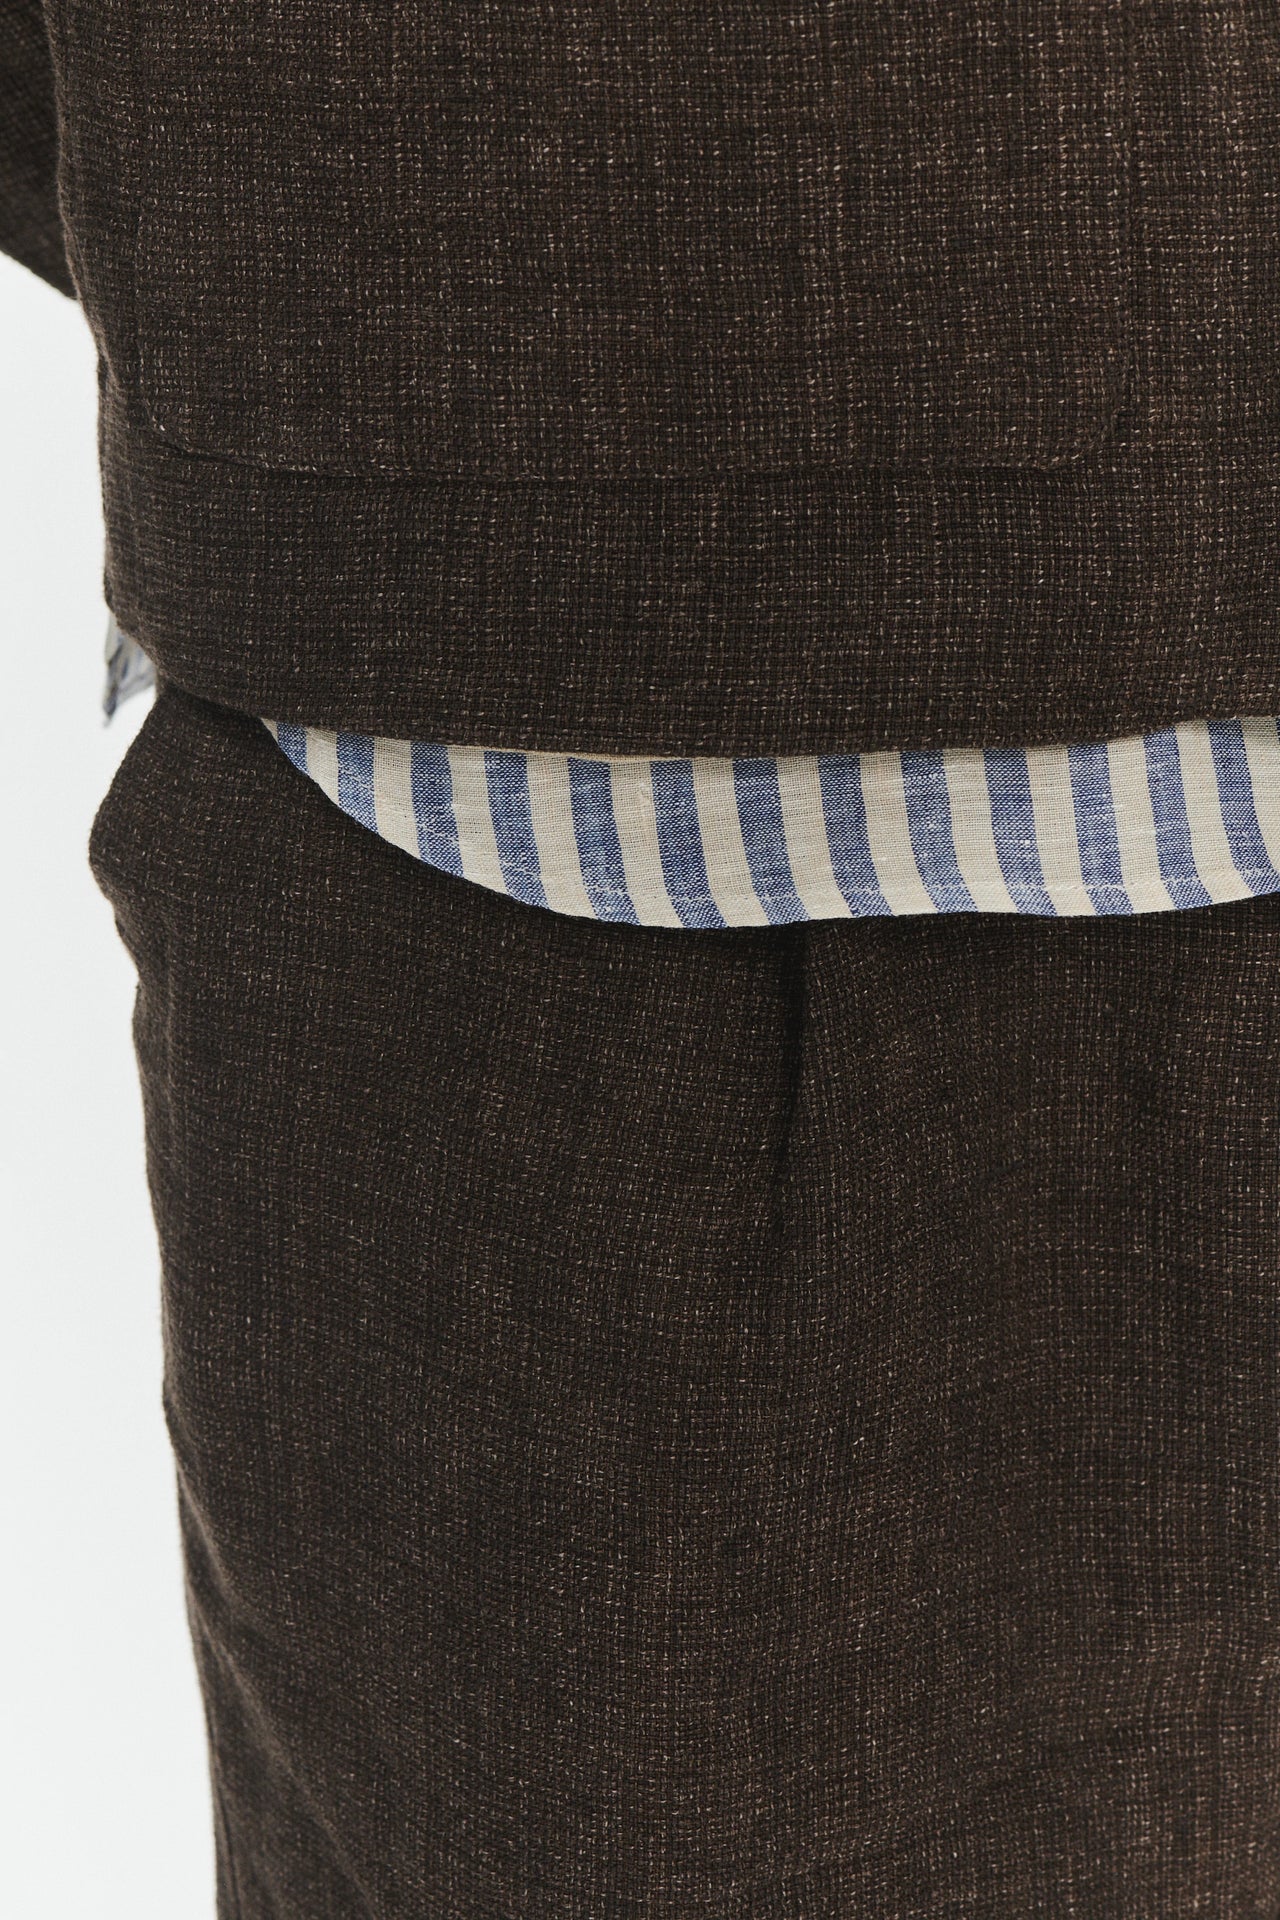 Genuine Trousers in a Brown Fluid and Structured Italian Linen Crepe